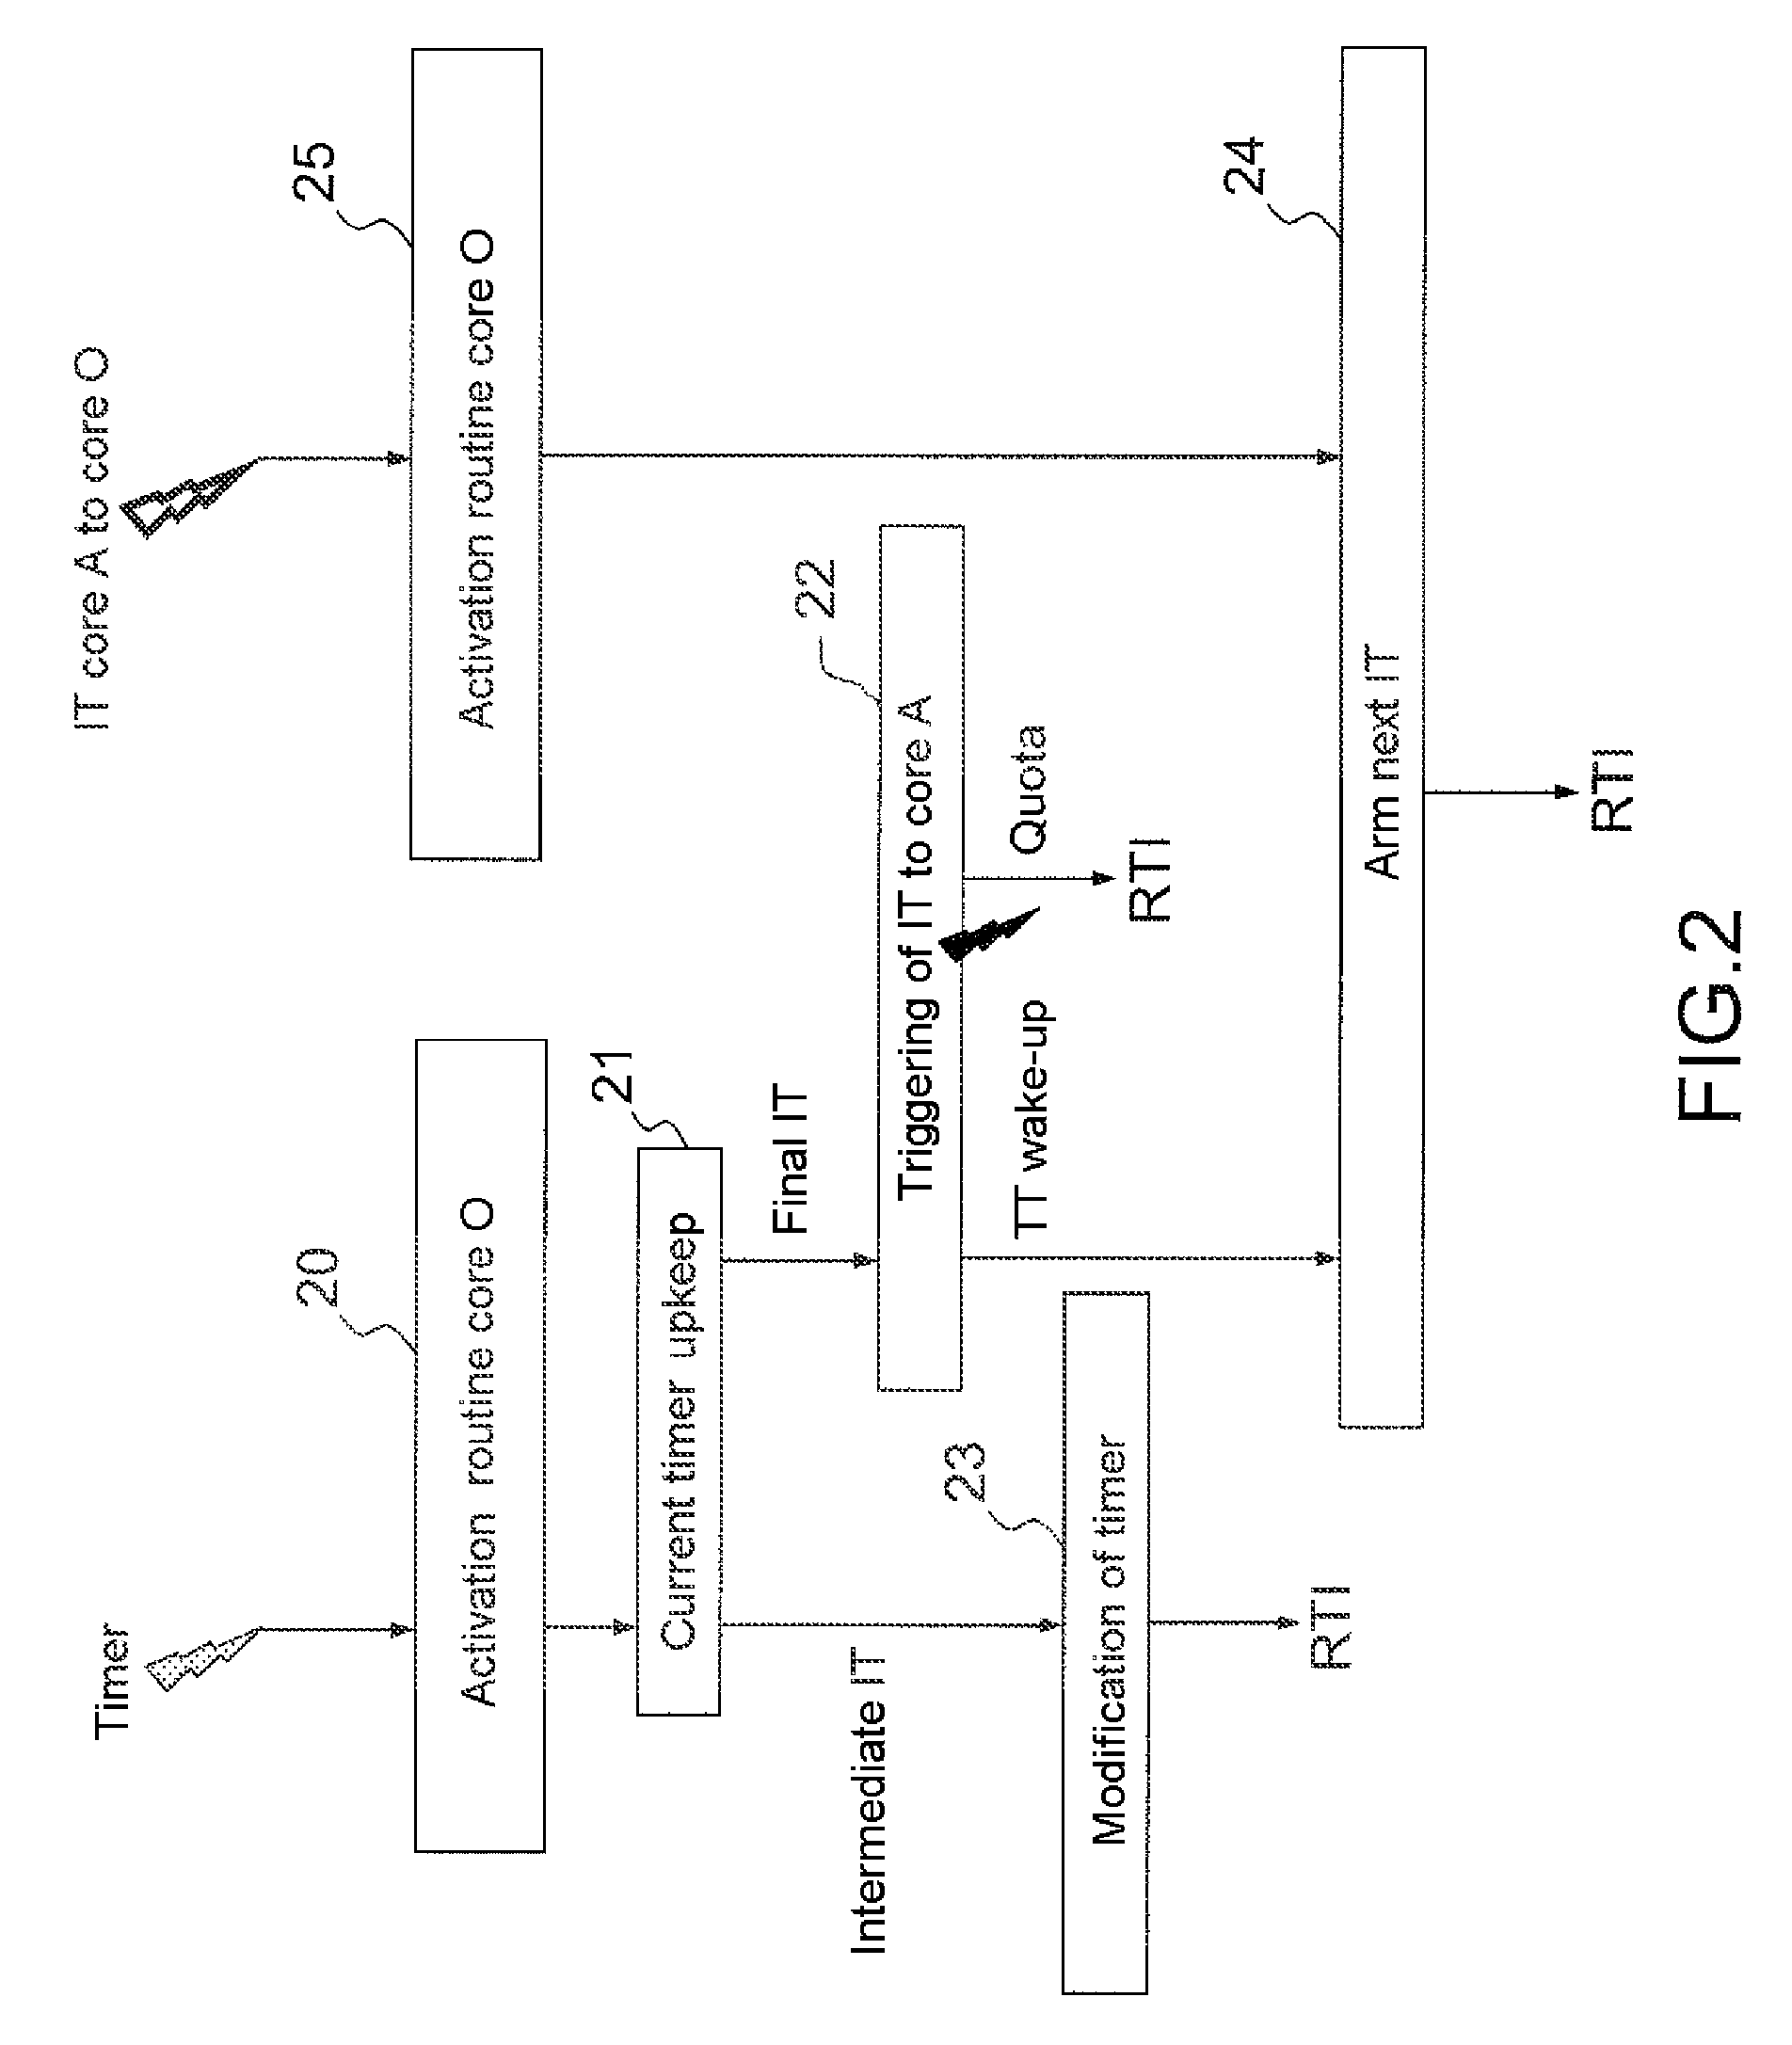 Method for the deterministic execution and synchronization of an information processing system comprising a plurality of processing cores executing system tasks